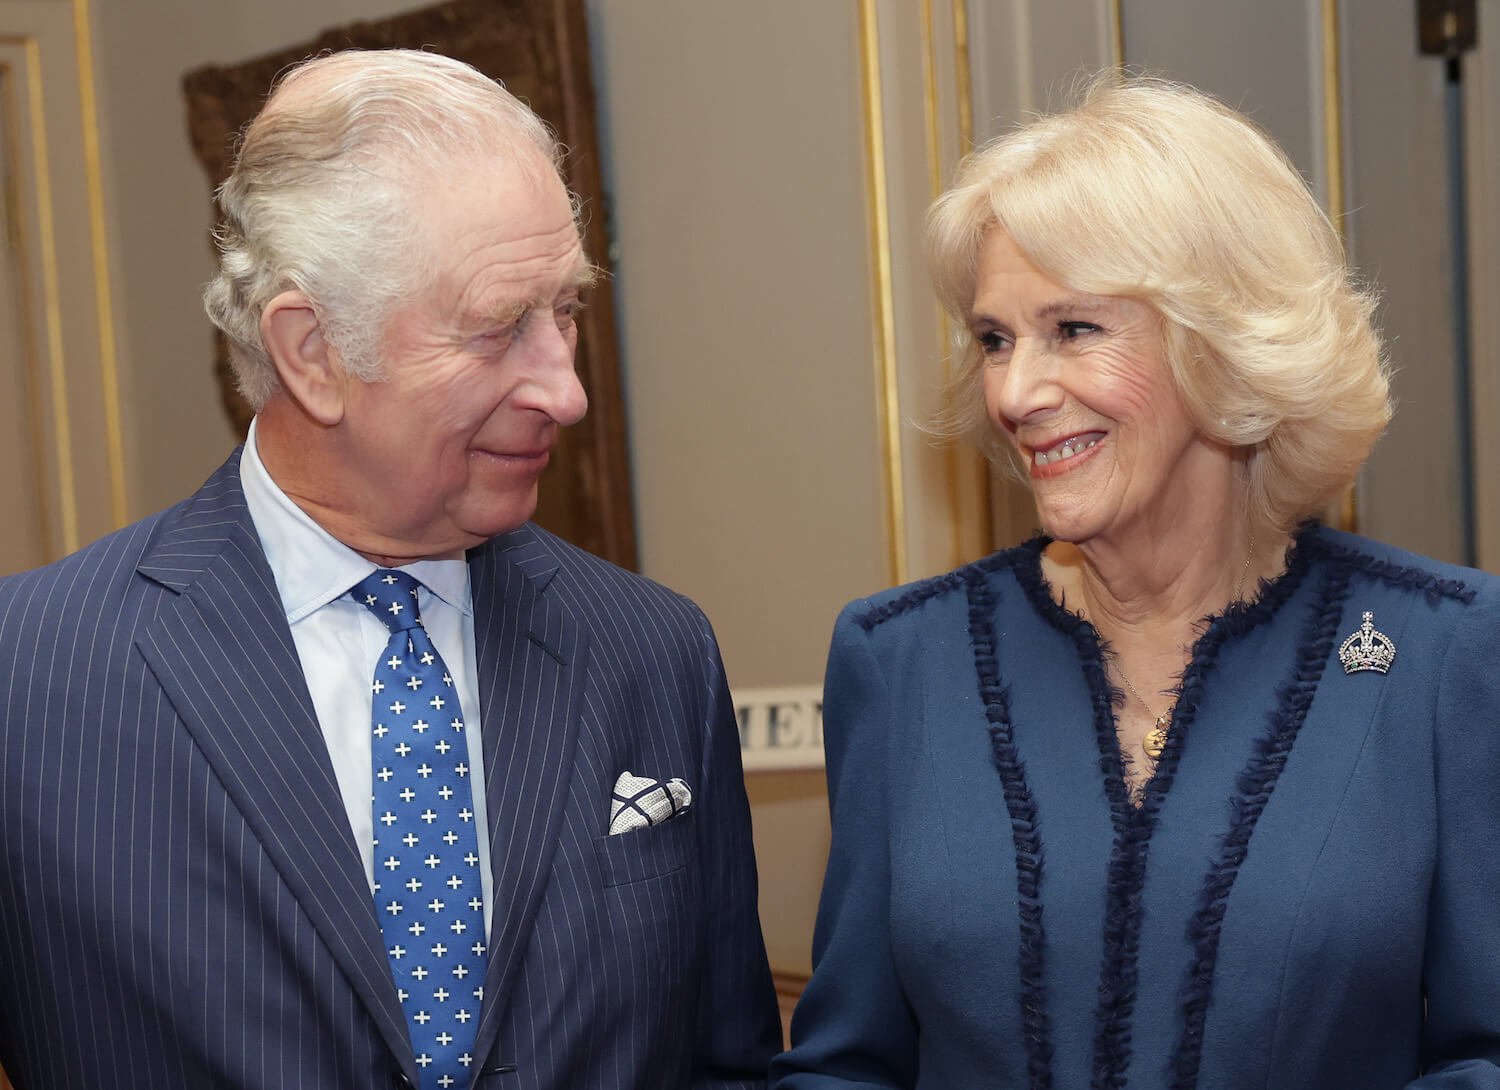 Camilla Parker Bowles body language is supportive around King Charles